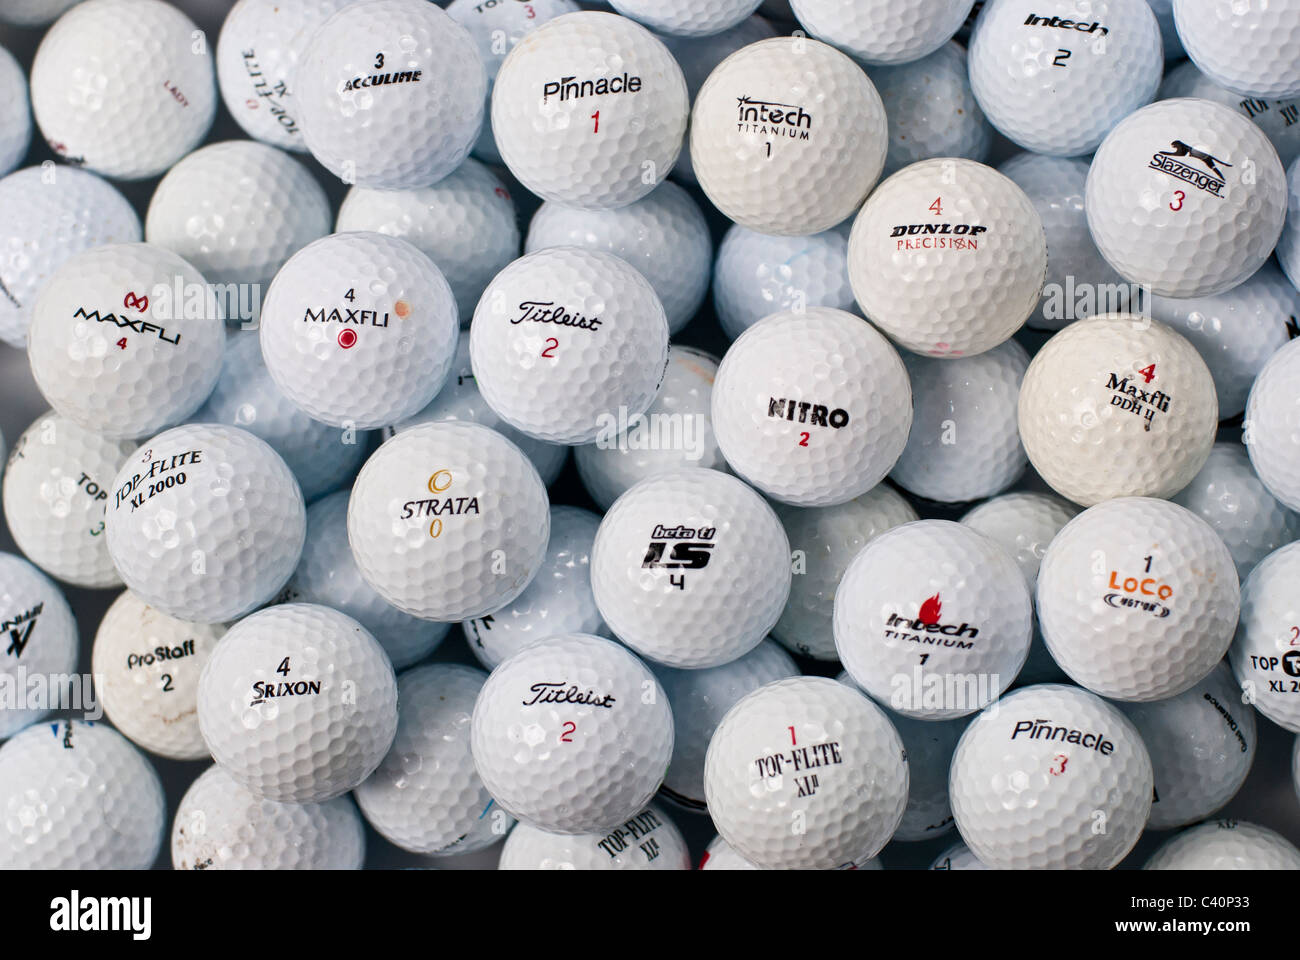 Golf Balls showing variety of logos and brands Stock Photo - Alamy